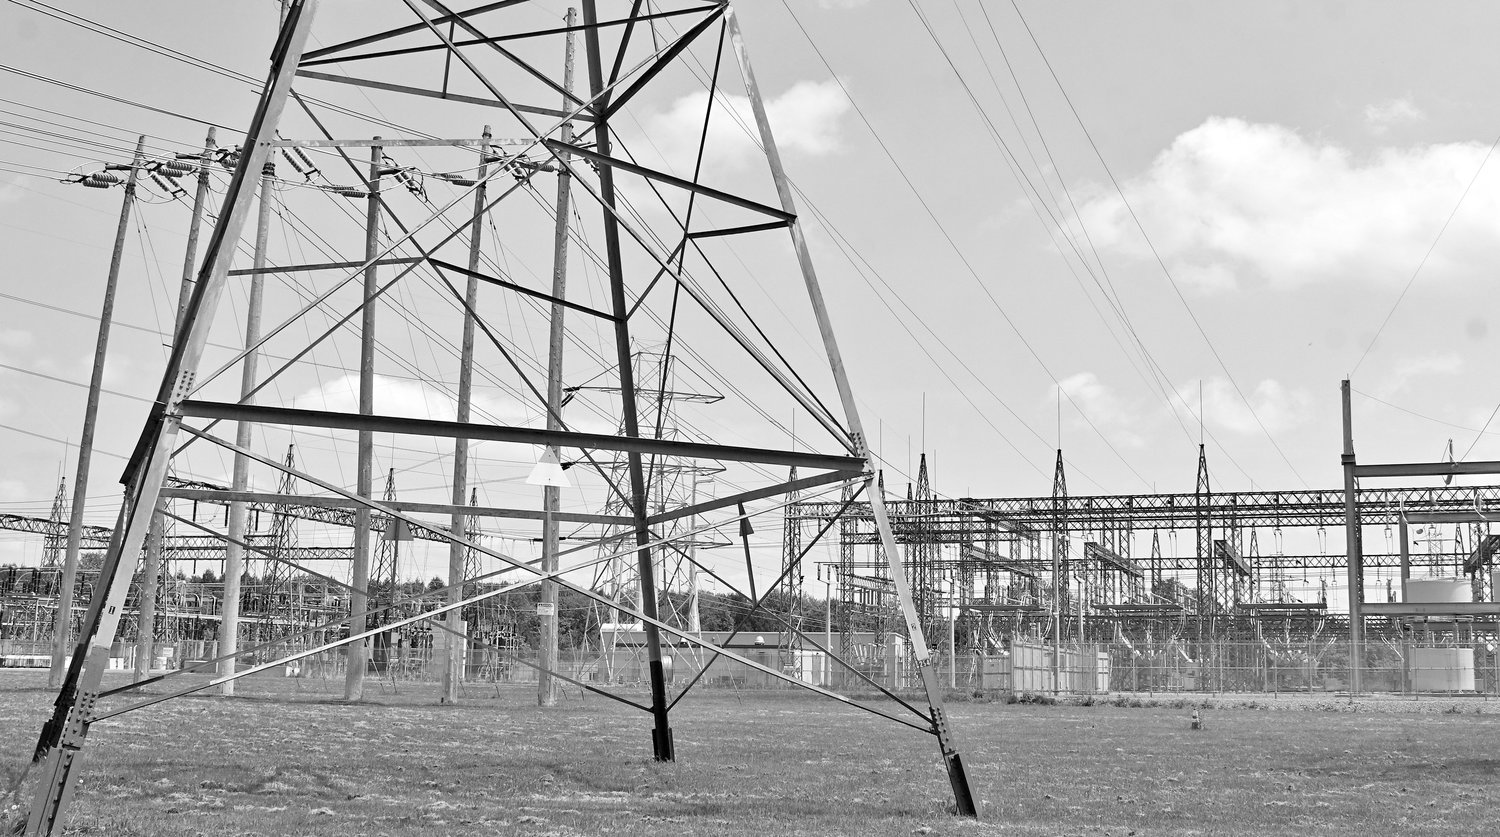 POWER TO THE PEOPLE — The National Grid electrical substation in Marcy is shown in this May 2021 file photo, following an announcement by the New York Power Authority of an agreement with National Grid to rebuild 110 miles of transmission lines in the Mohawk Valley and North Country as part of the Smart Path Connect project. The state’s electrical grid, utility officials said Wednesday, is sufficient to meet expected heavy winter demands.